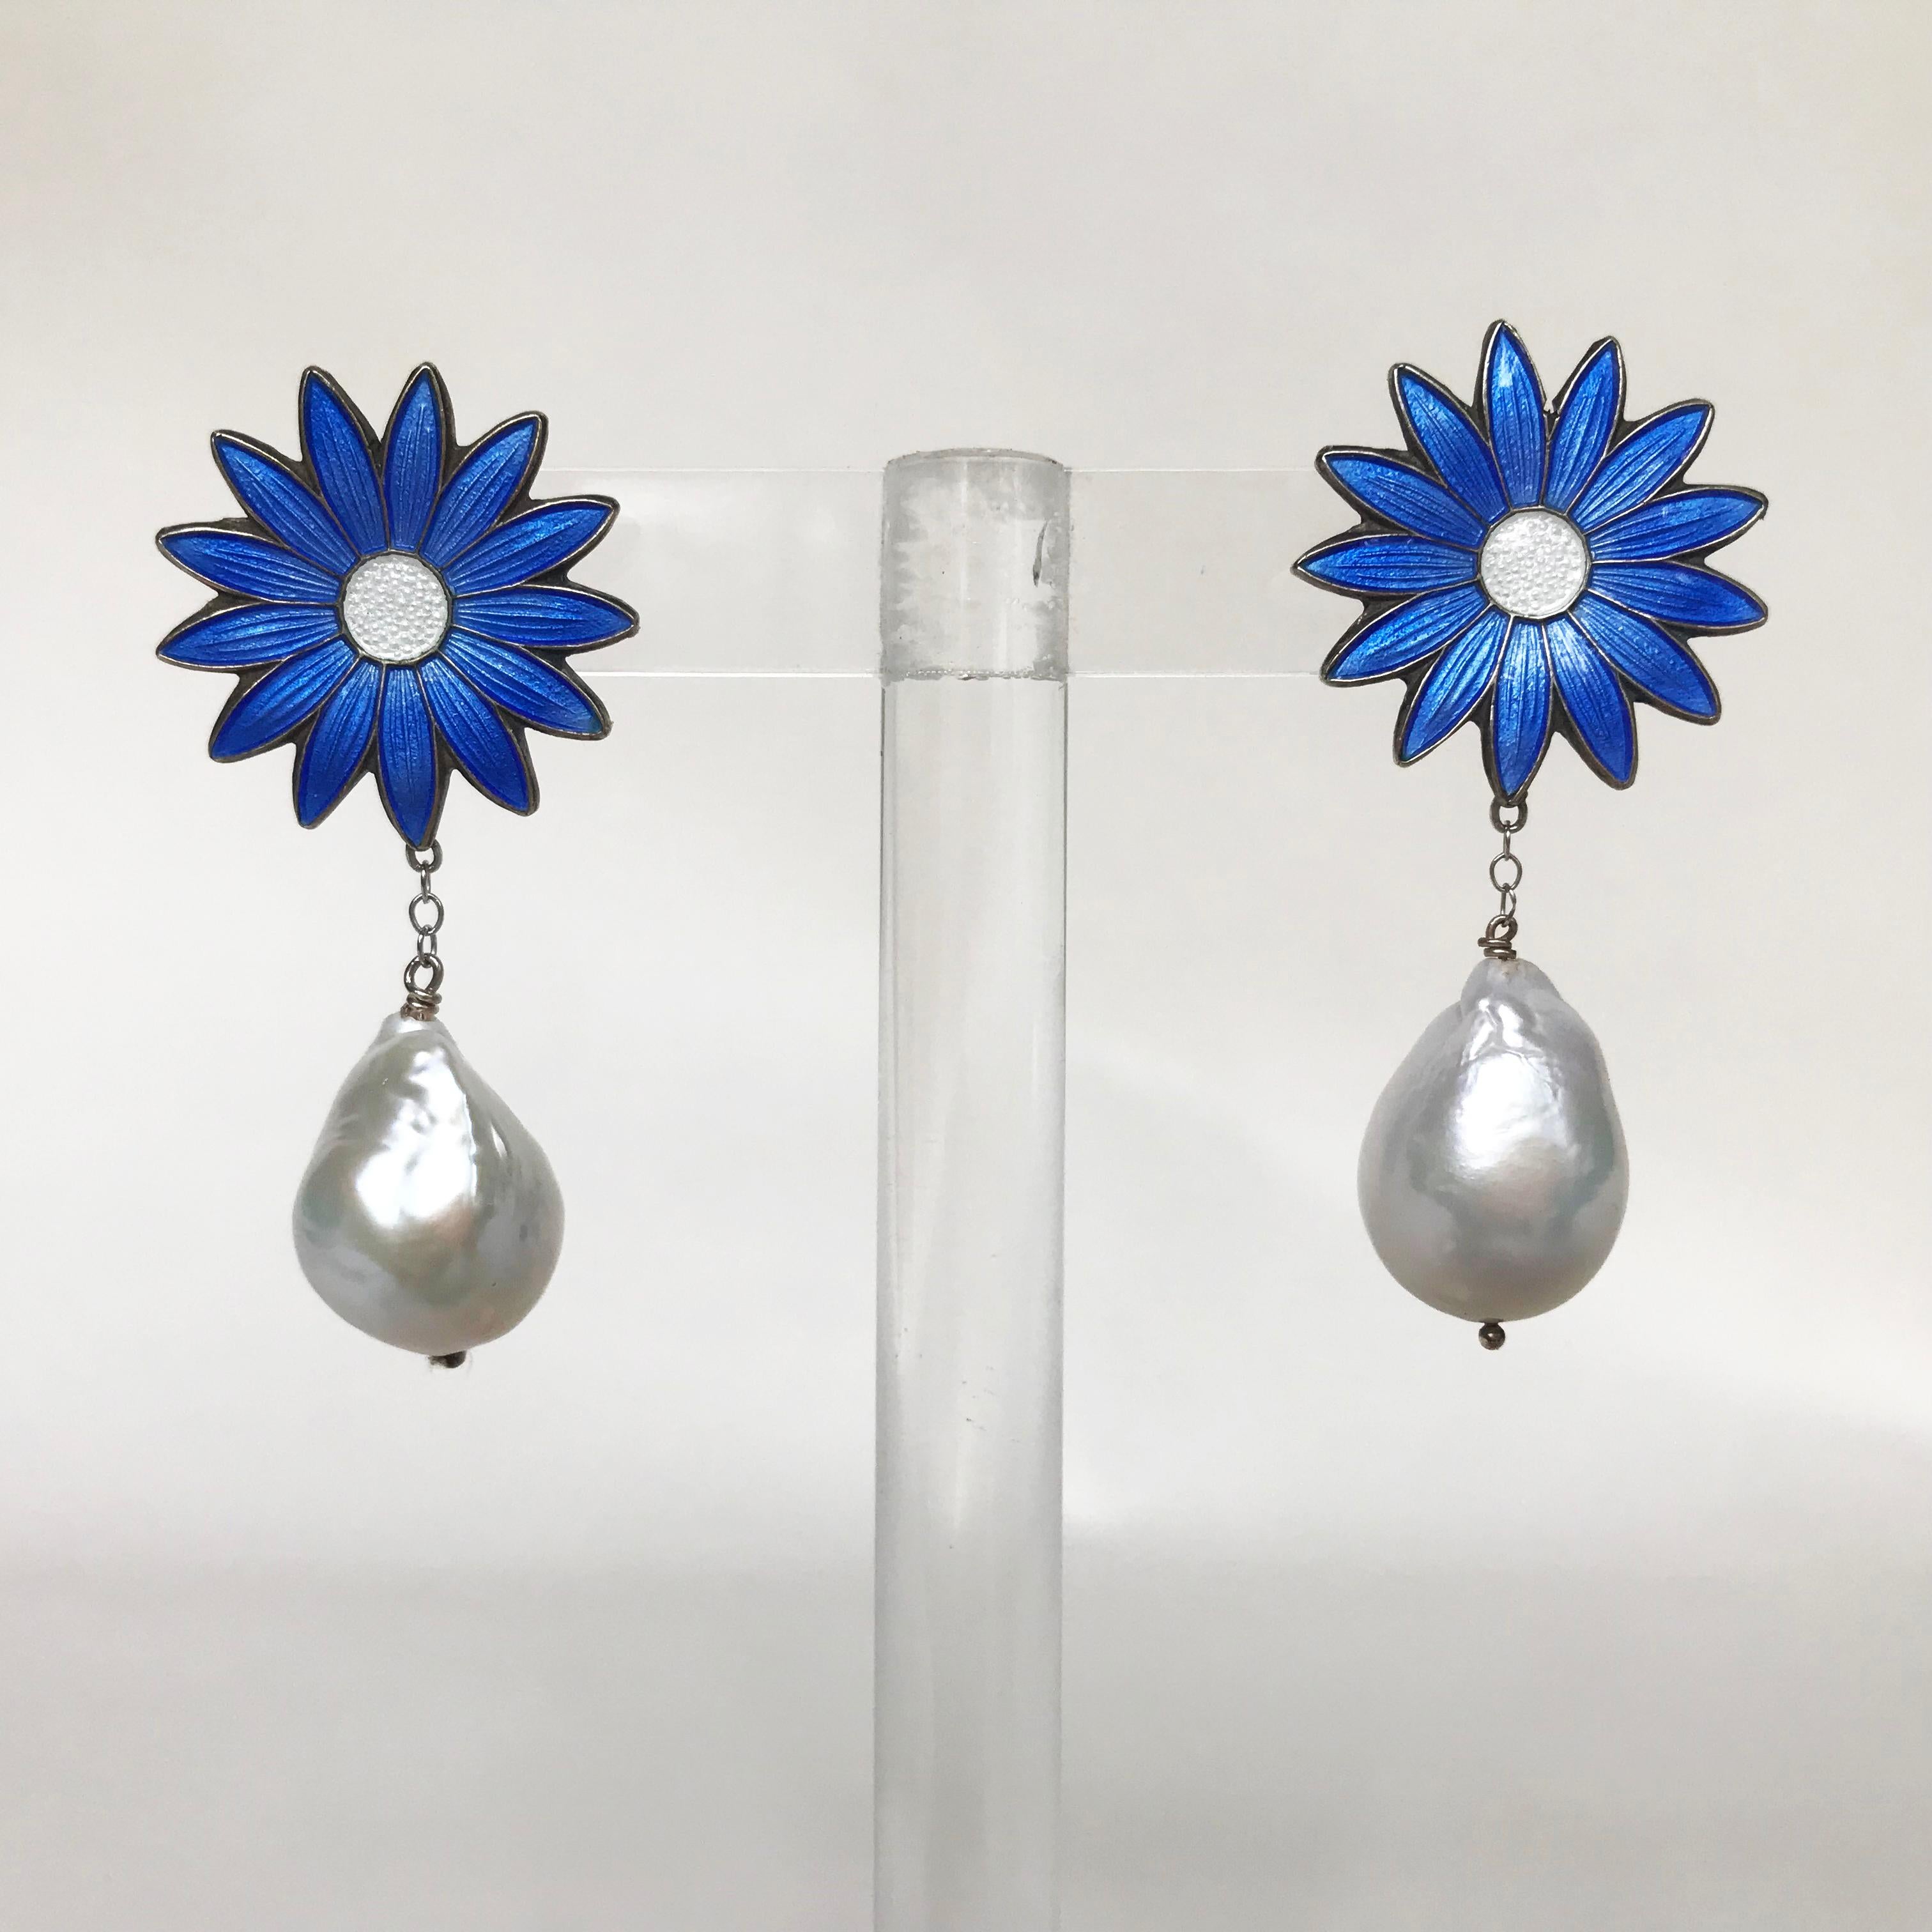 Marina J. presents a beautiful white gold stud earring design, made of a vintage sterling silver enamel and 17mm white pearls. This unique piece is shaped like a blue flower and drops with a white gold chain a beautiful big white pearl that sways